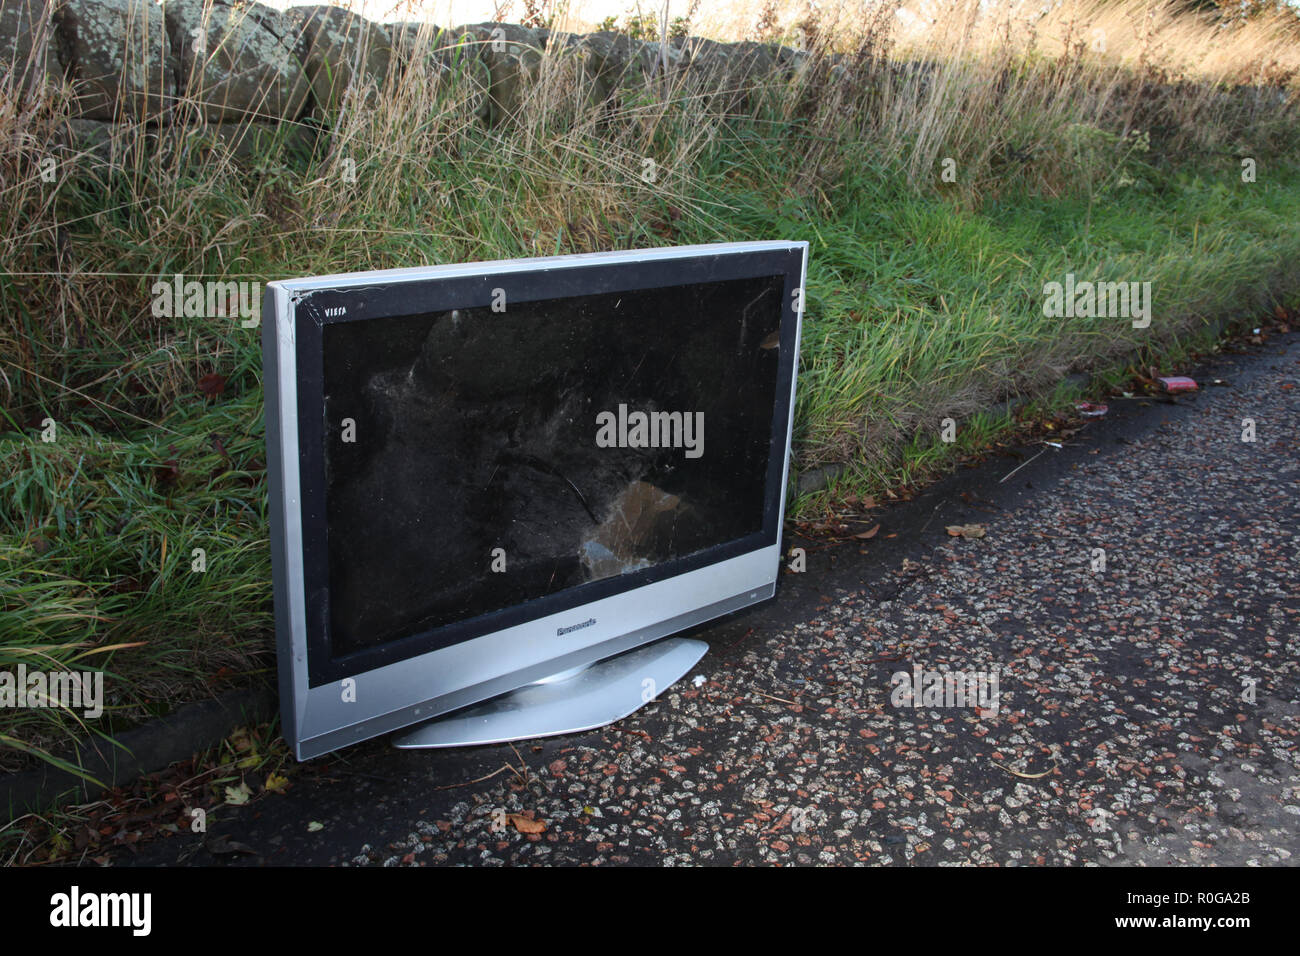 A damaged television set abandoned at the side of the road Stock Photo